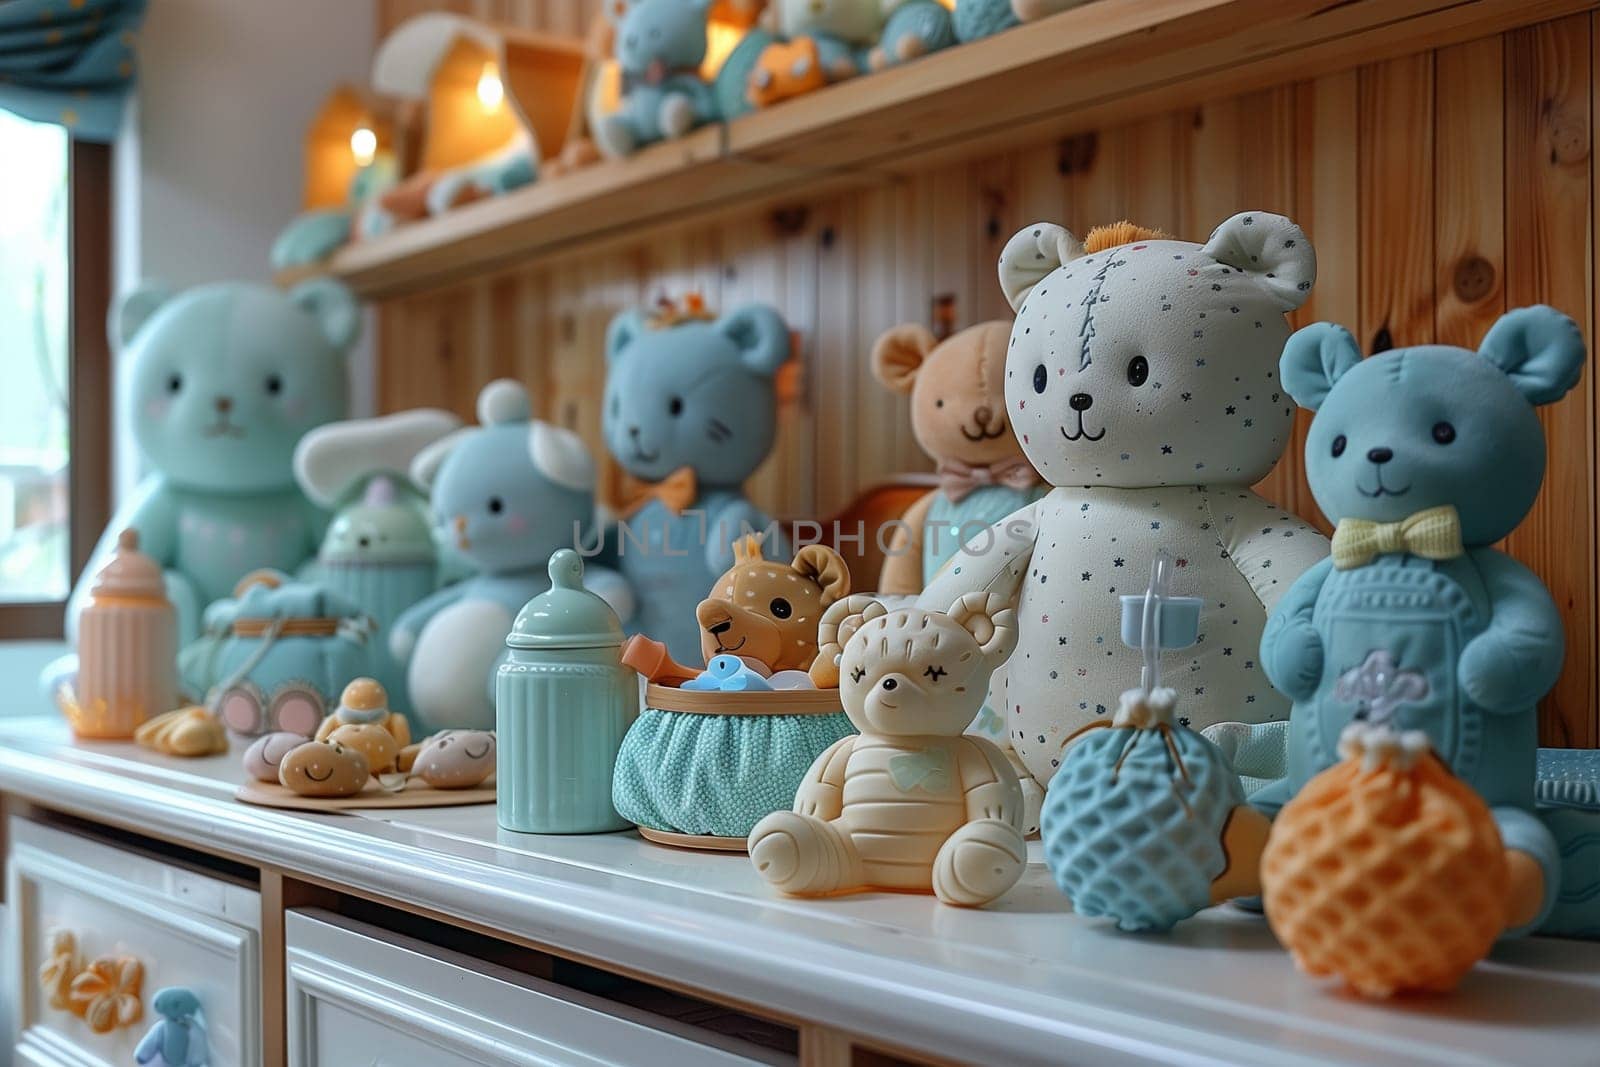 Collection of Teddy Bears on Dresser by Sd28DimoN_1976